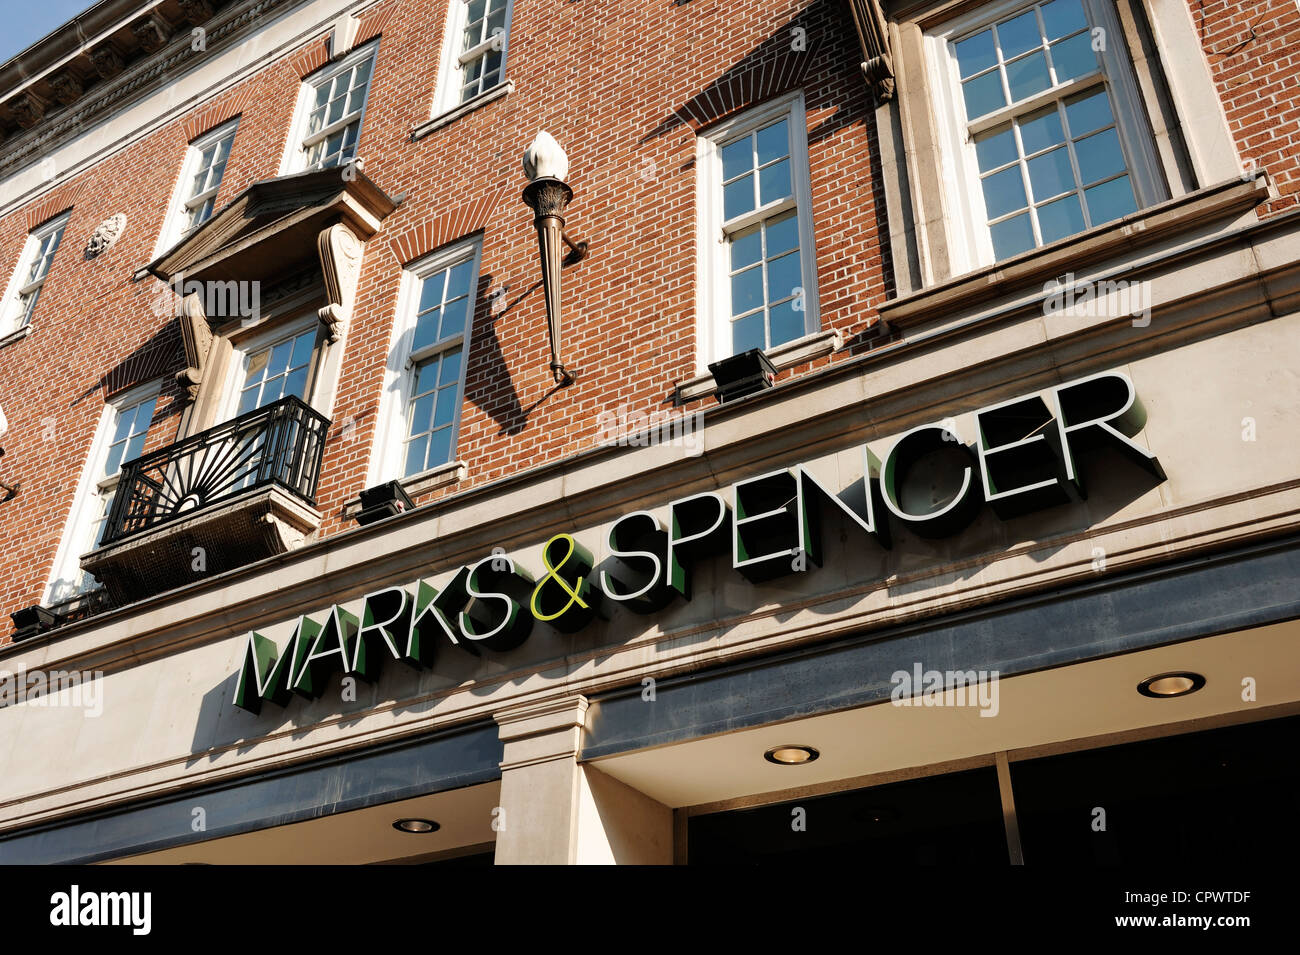 Marks and Spencer shop front sign Stock Photo